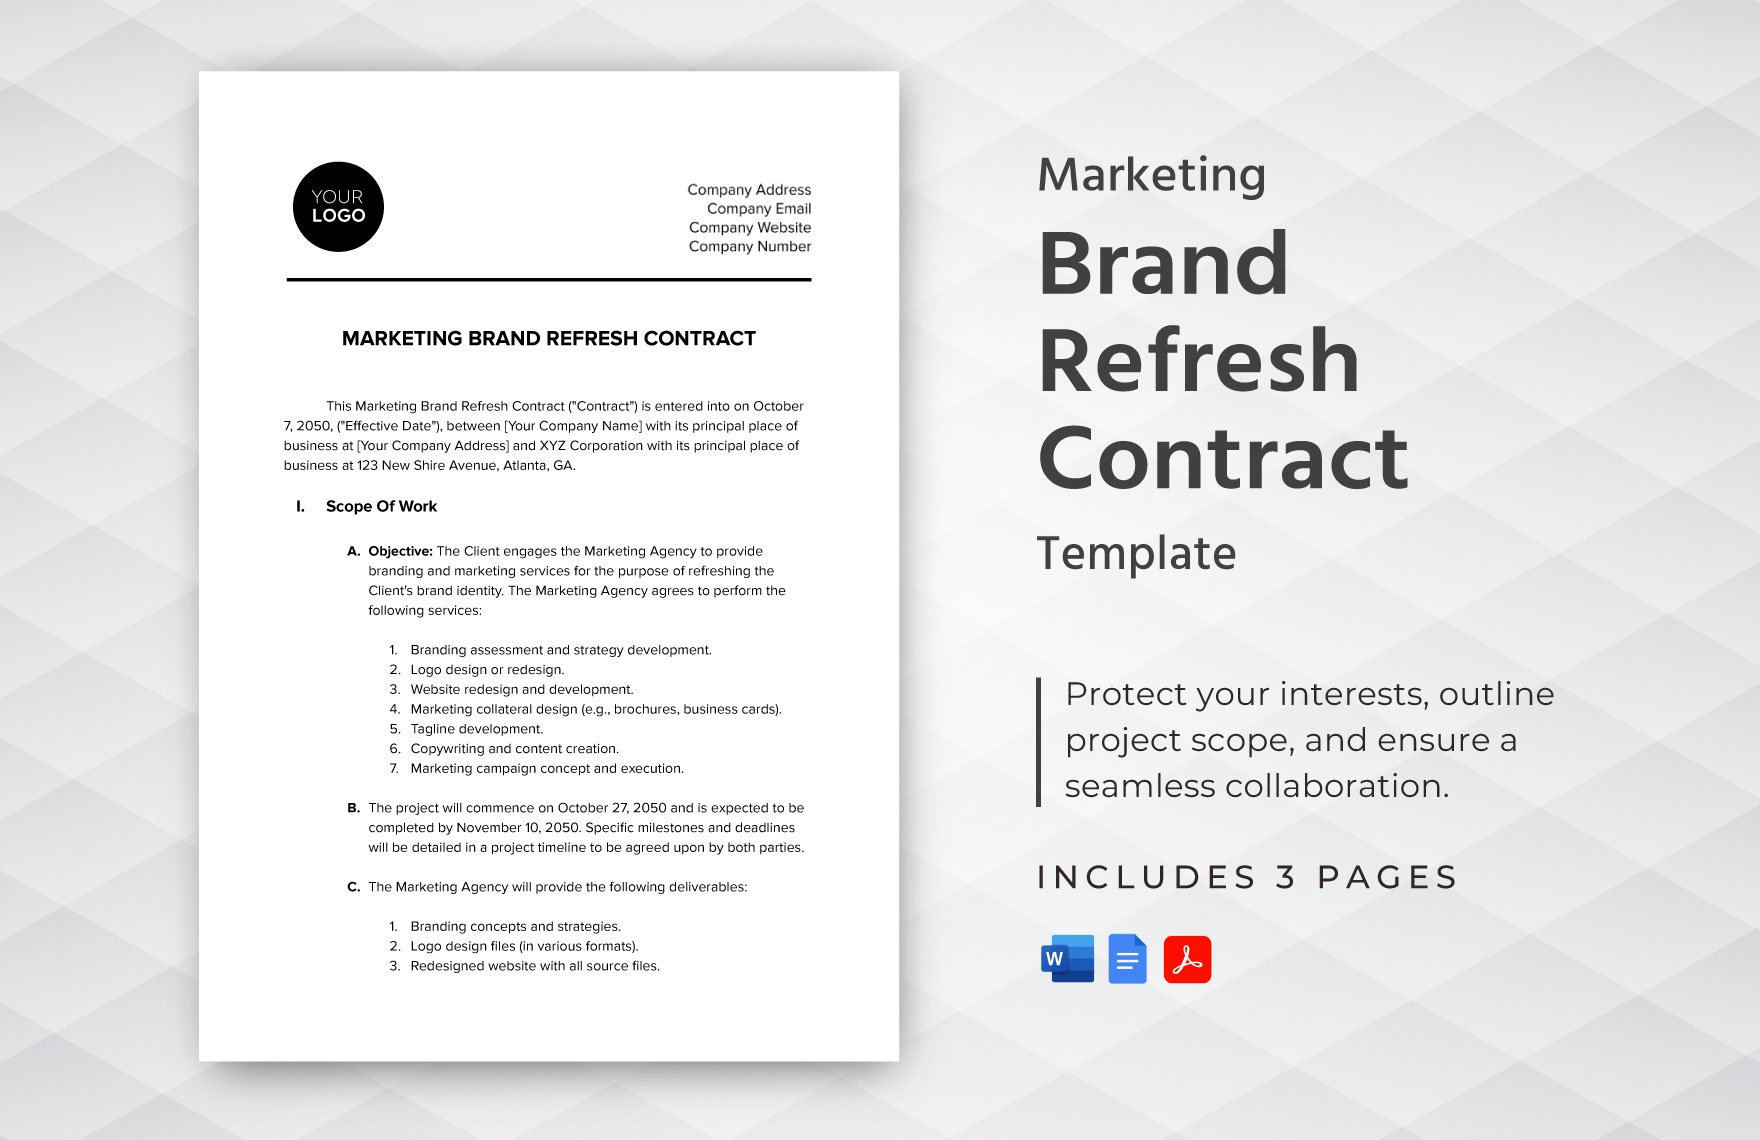 Marketing Brand Refresh Contract Template